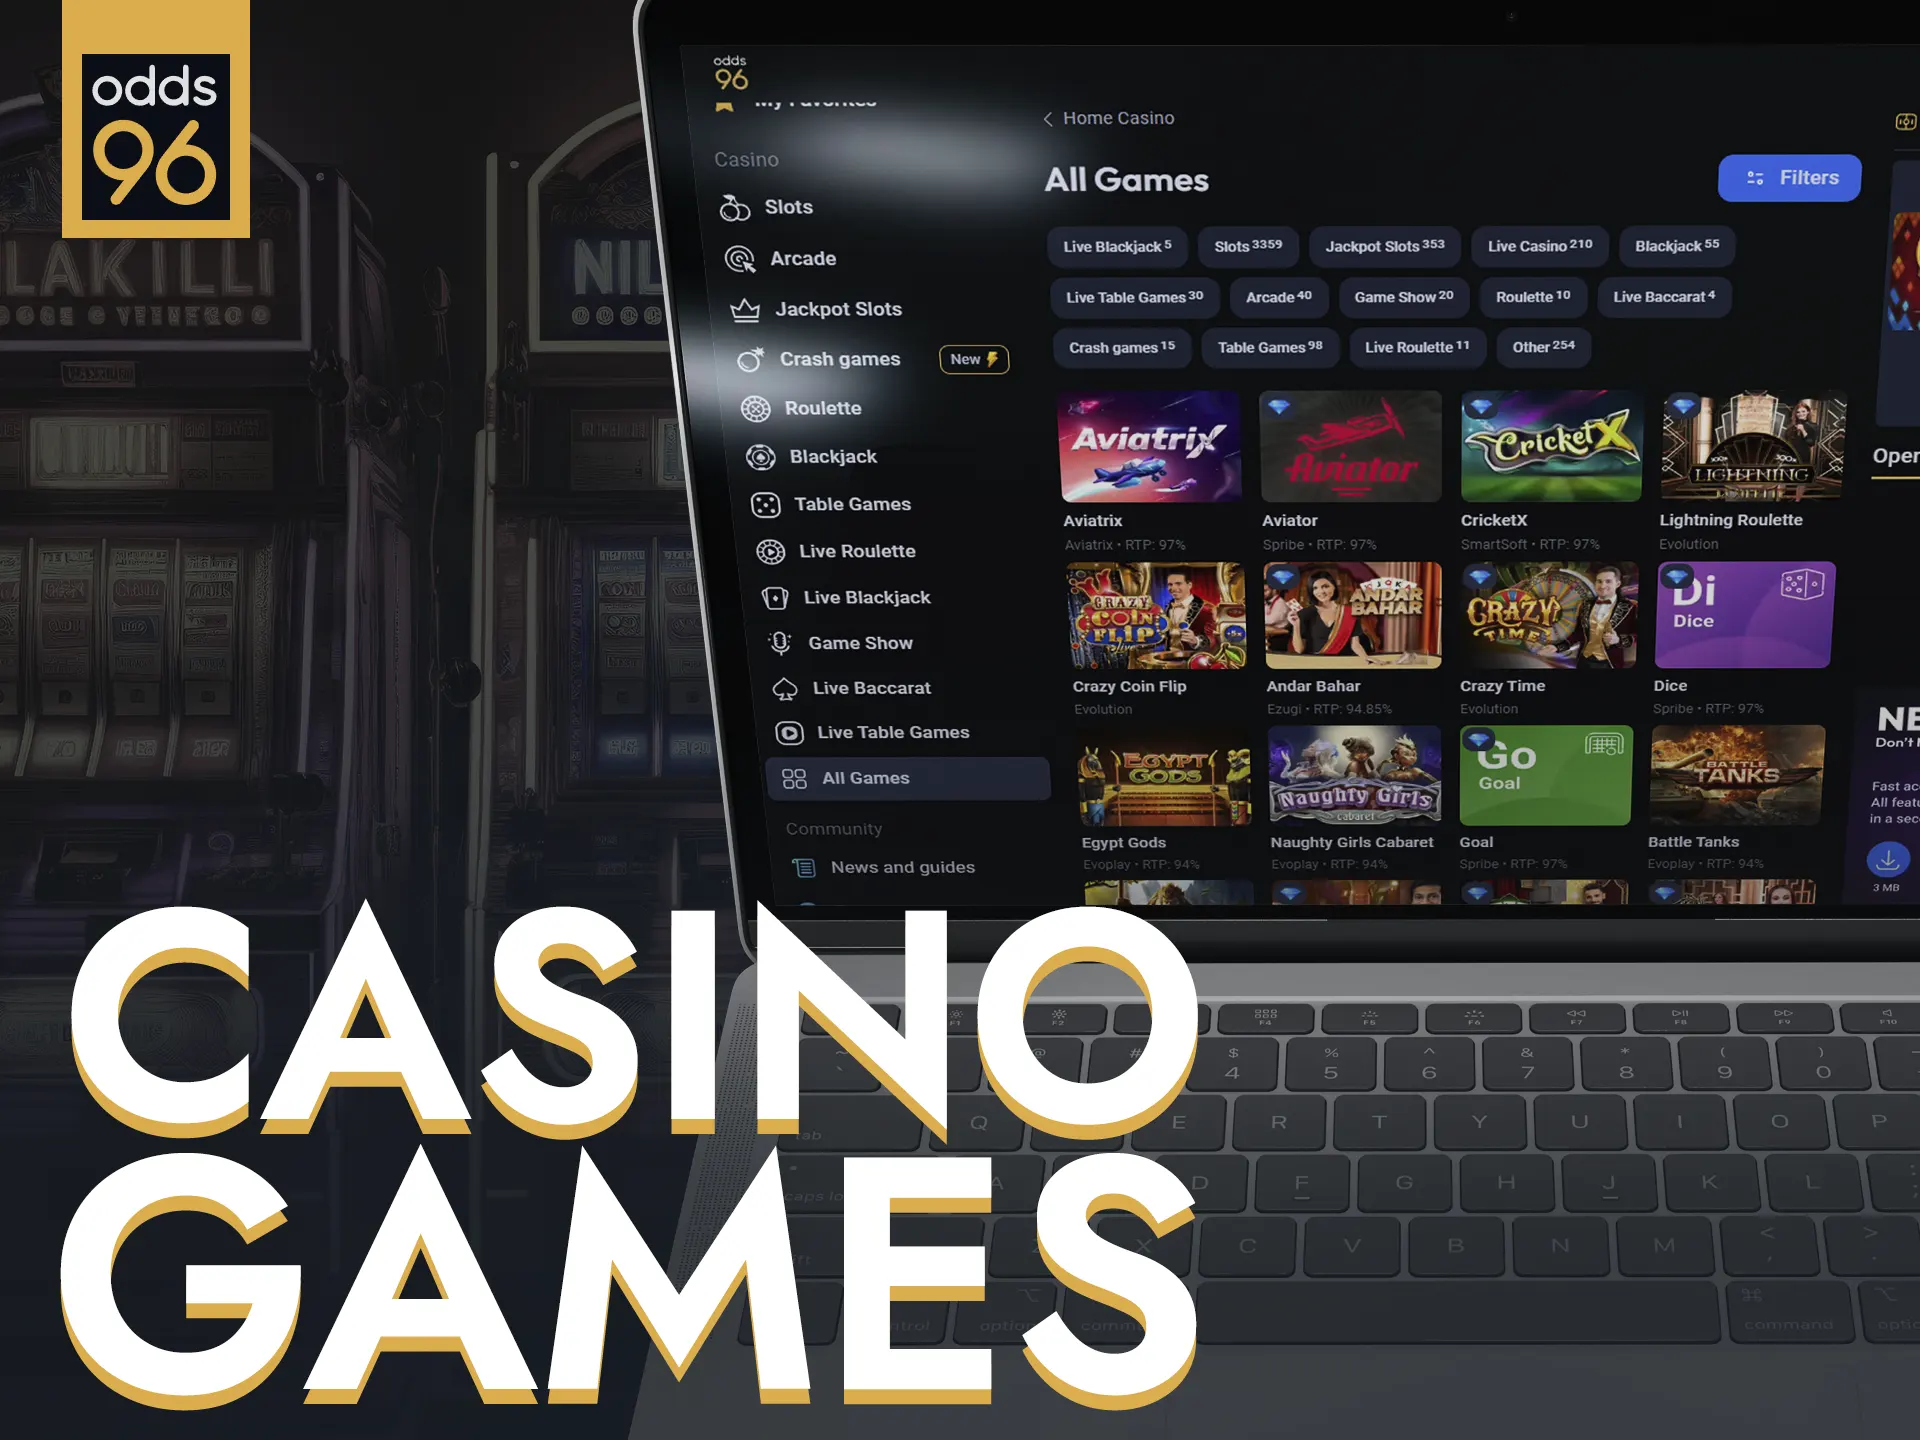 Odds96 offers a diverse range of exciting casino games.